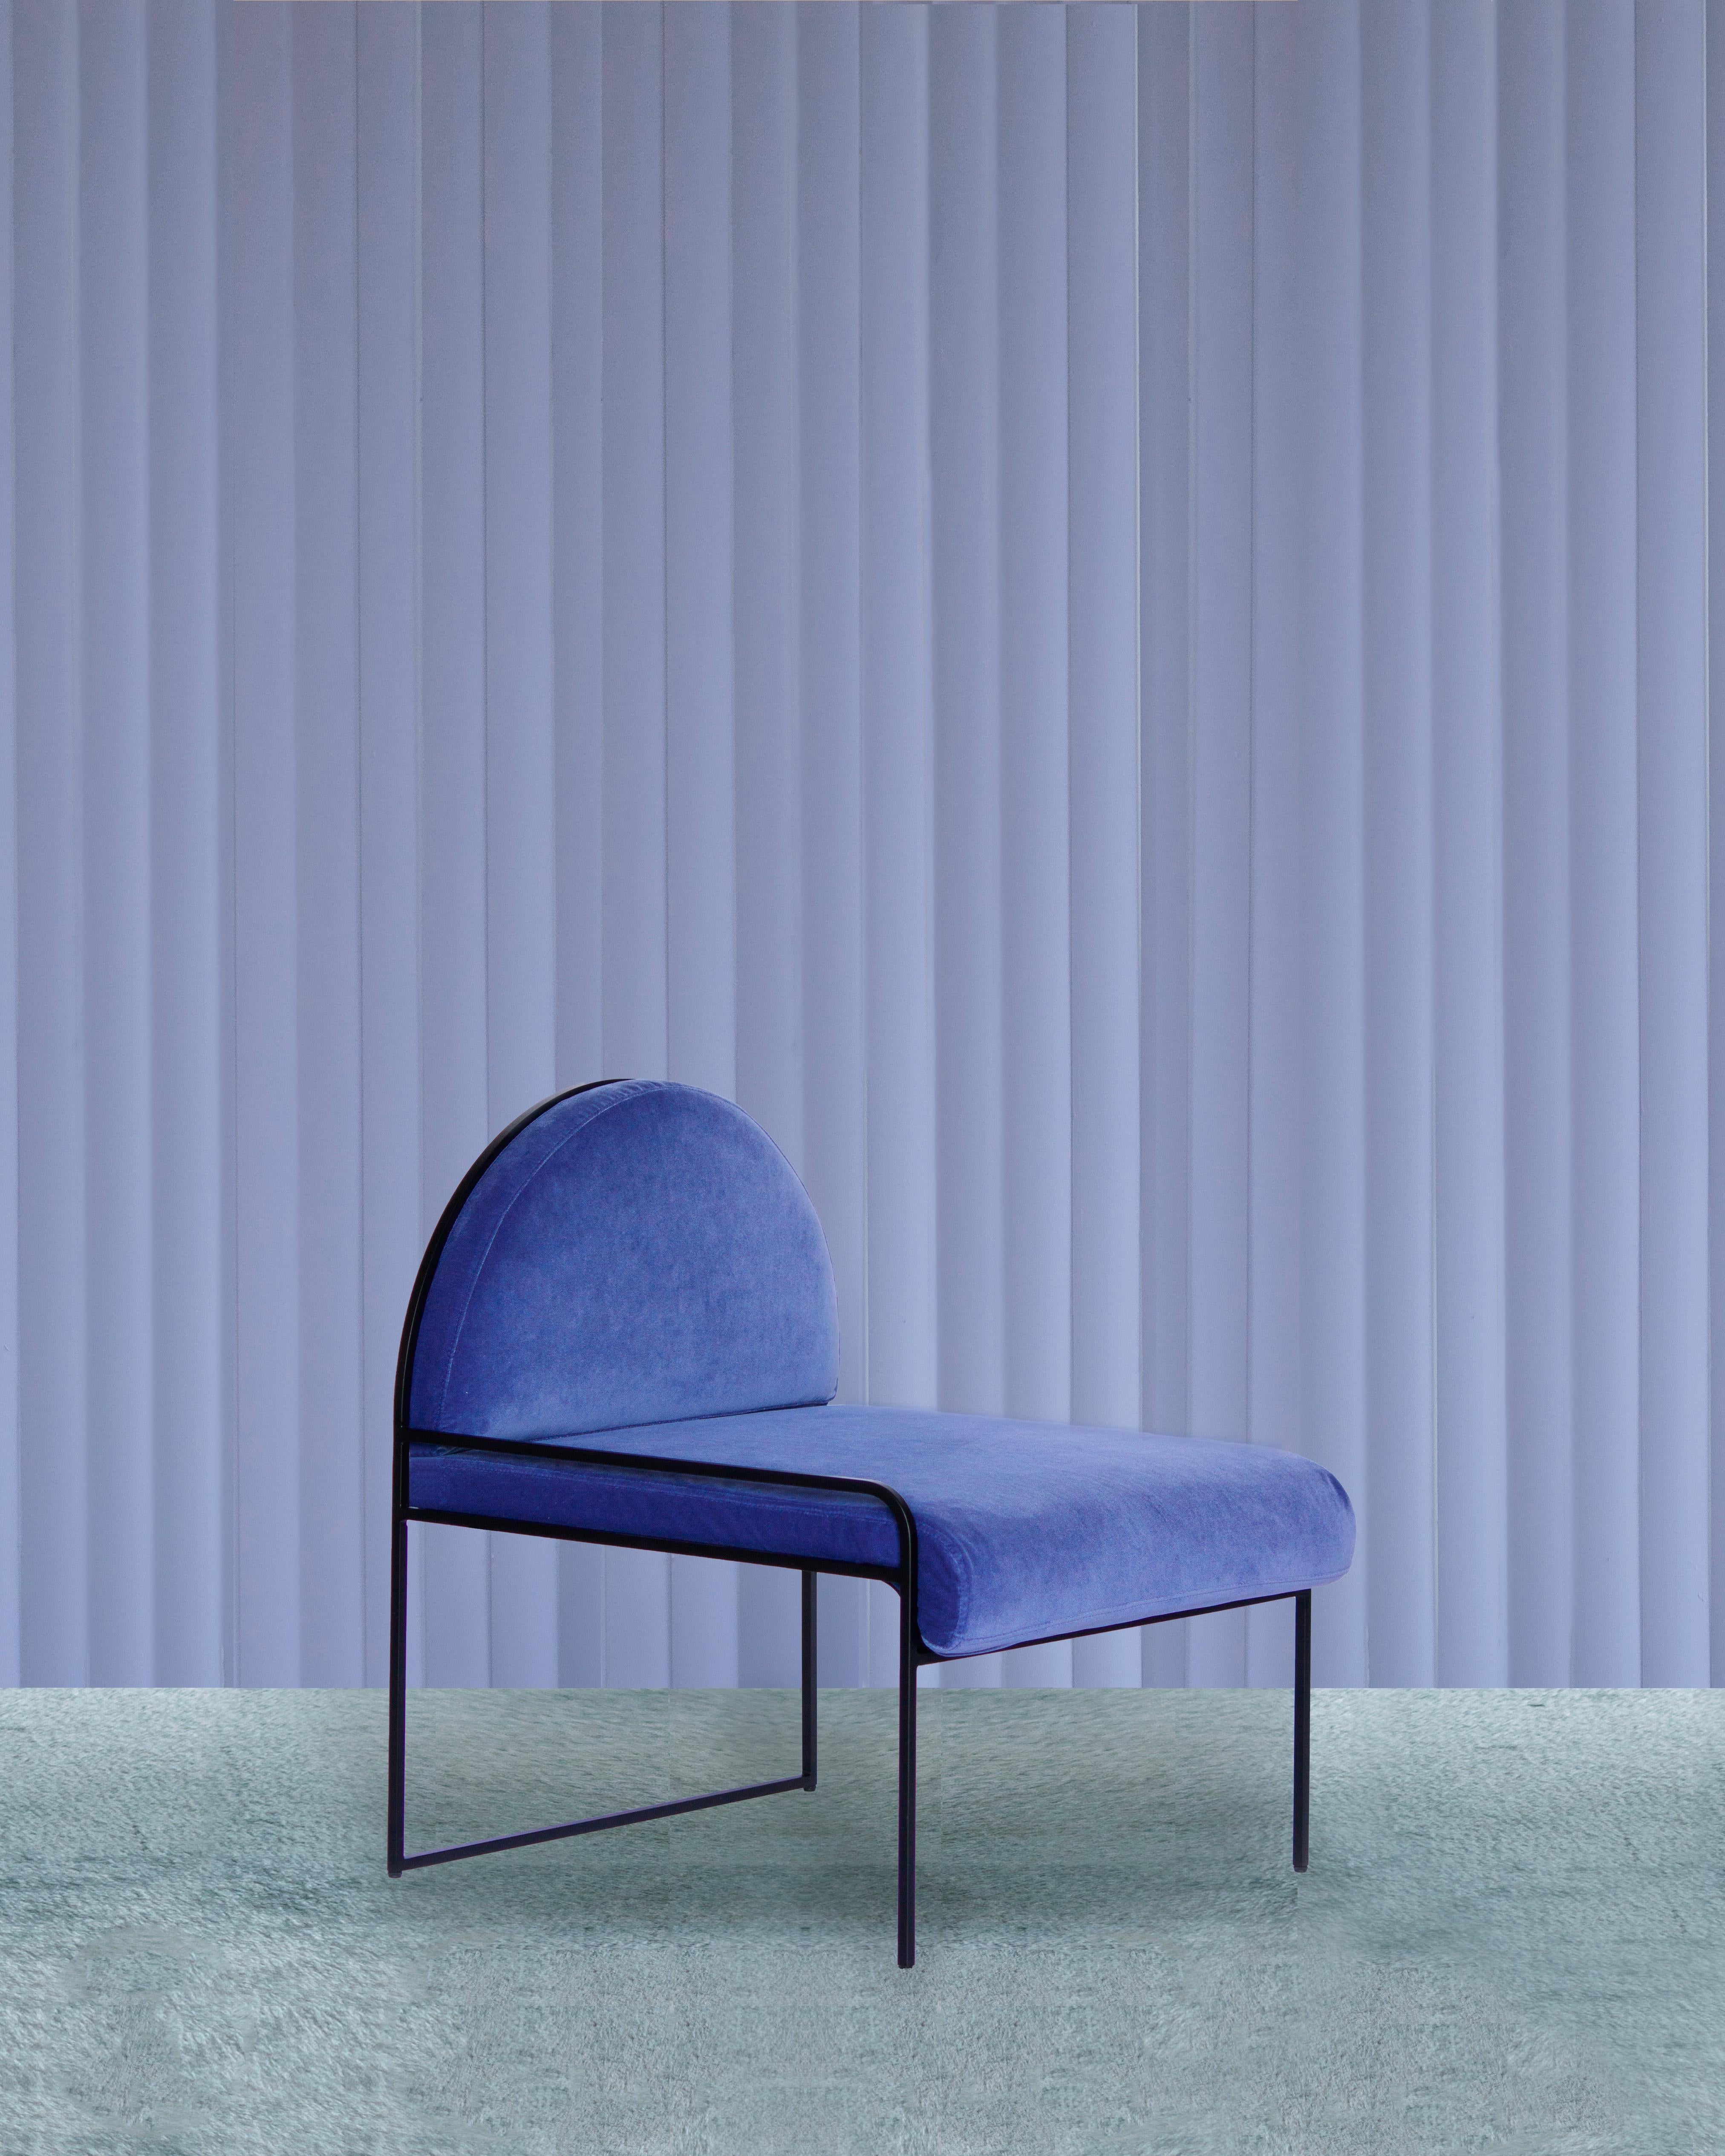 Blue SW velvet chair by Soft-geometry
Materials: Velvet, stainless steel
Dimensions: 26 x 26 x 30” H 

Chair dressed in crisp velvet upholstery on a simple arched frame in stainless steel. Finding a delicate softness within its stark minimalism